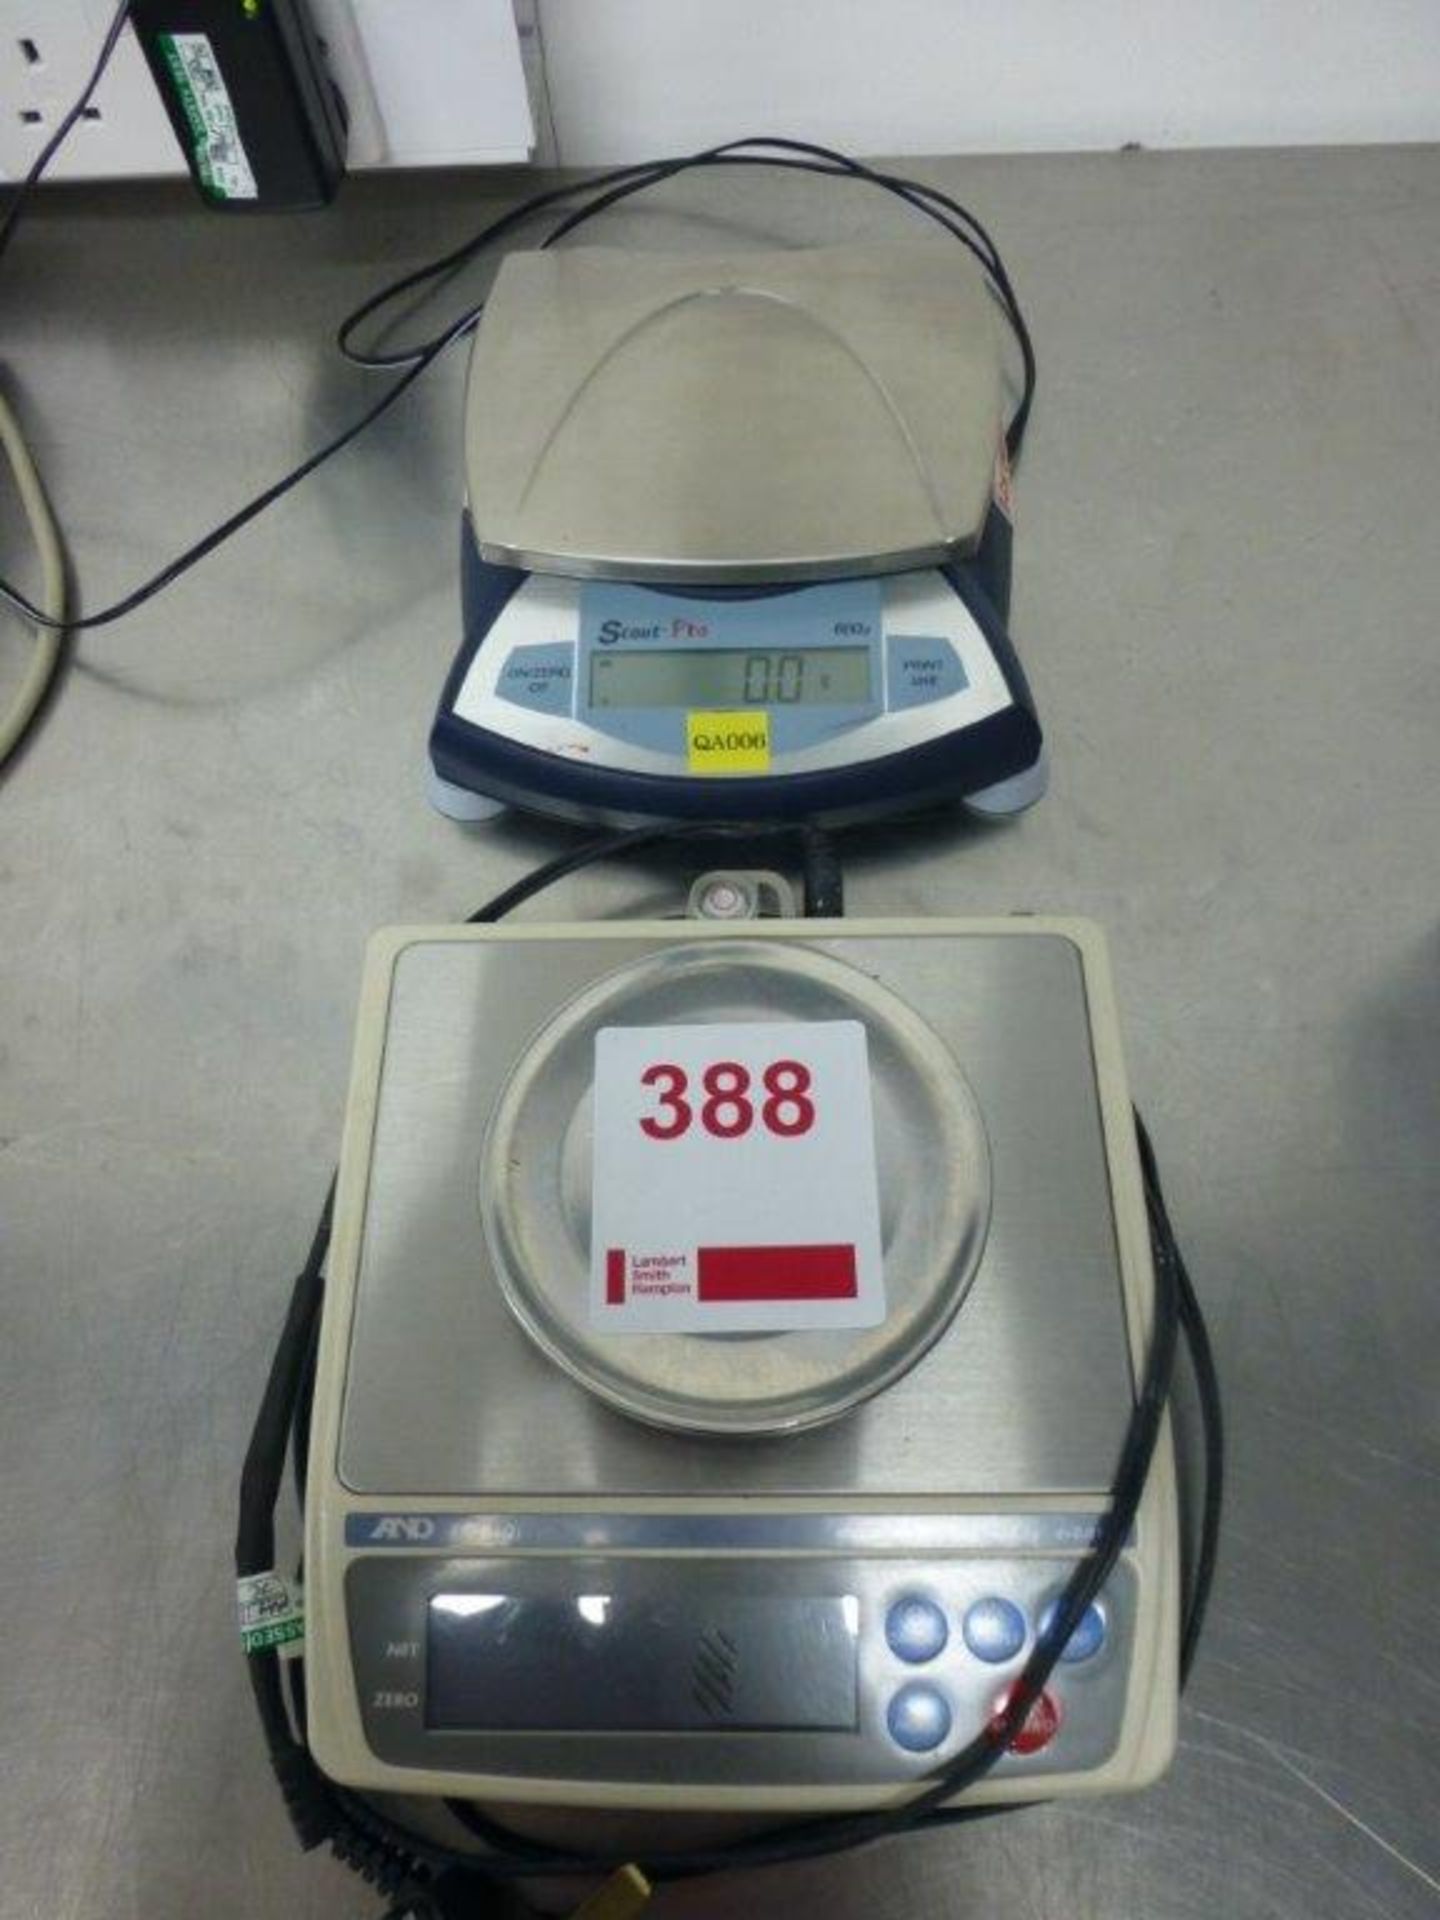 AND EK610i benchtop digital scale and Scout Pro 600g benchtop digital scale